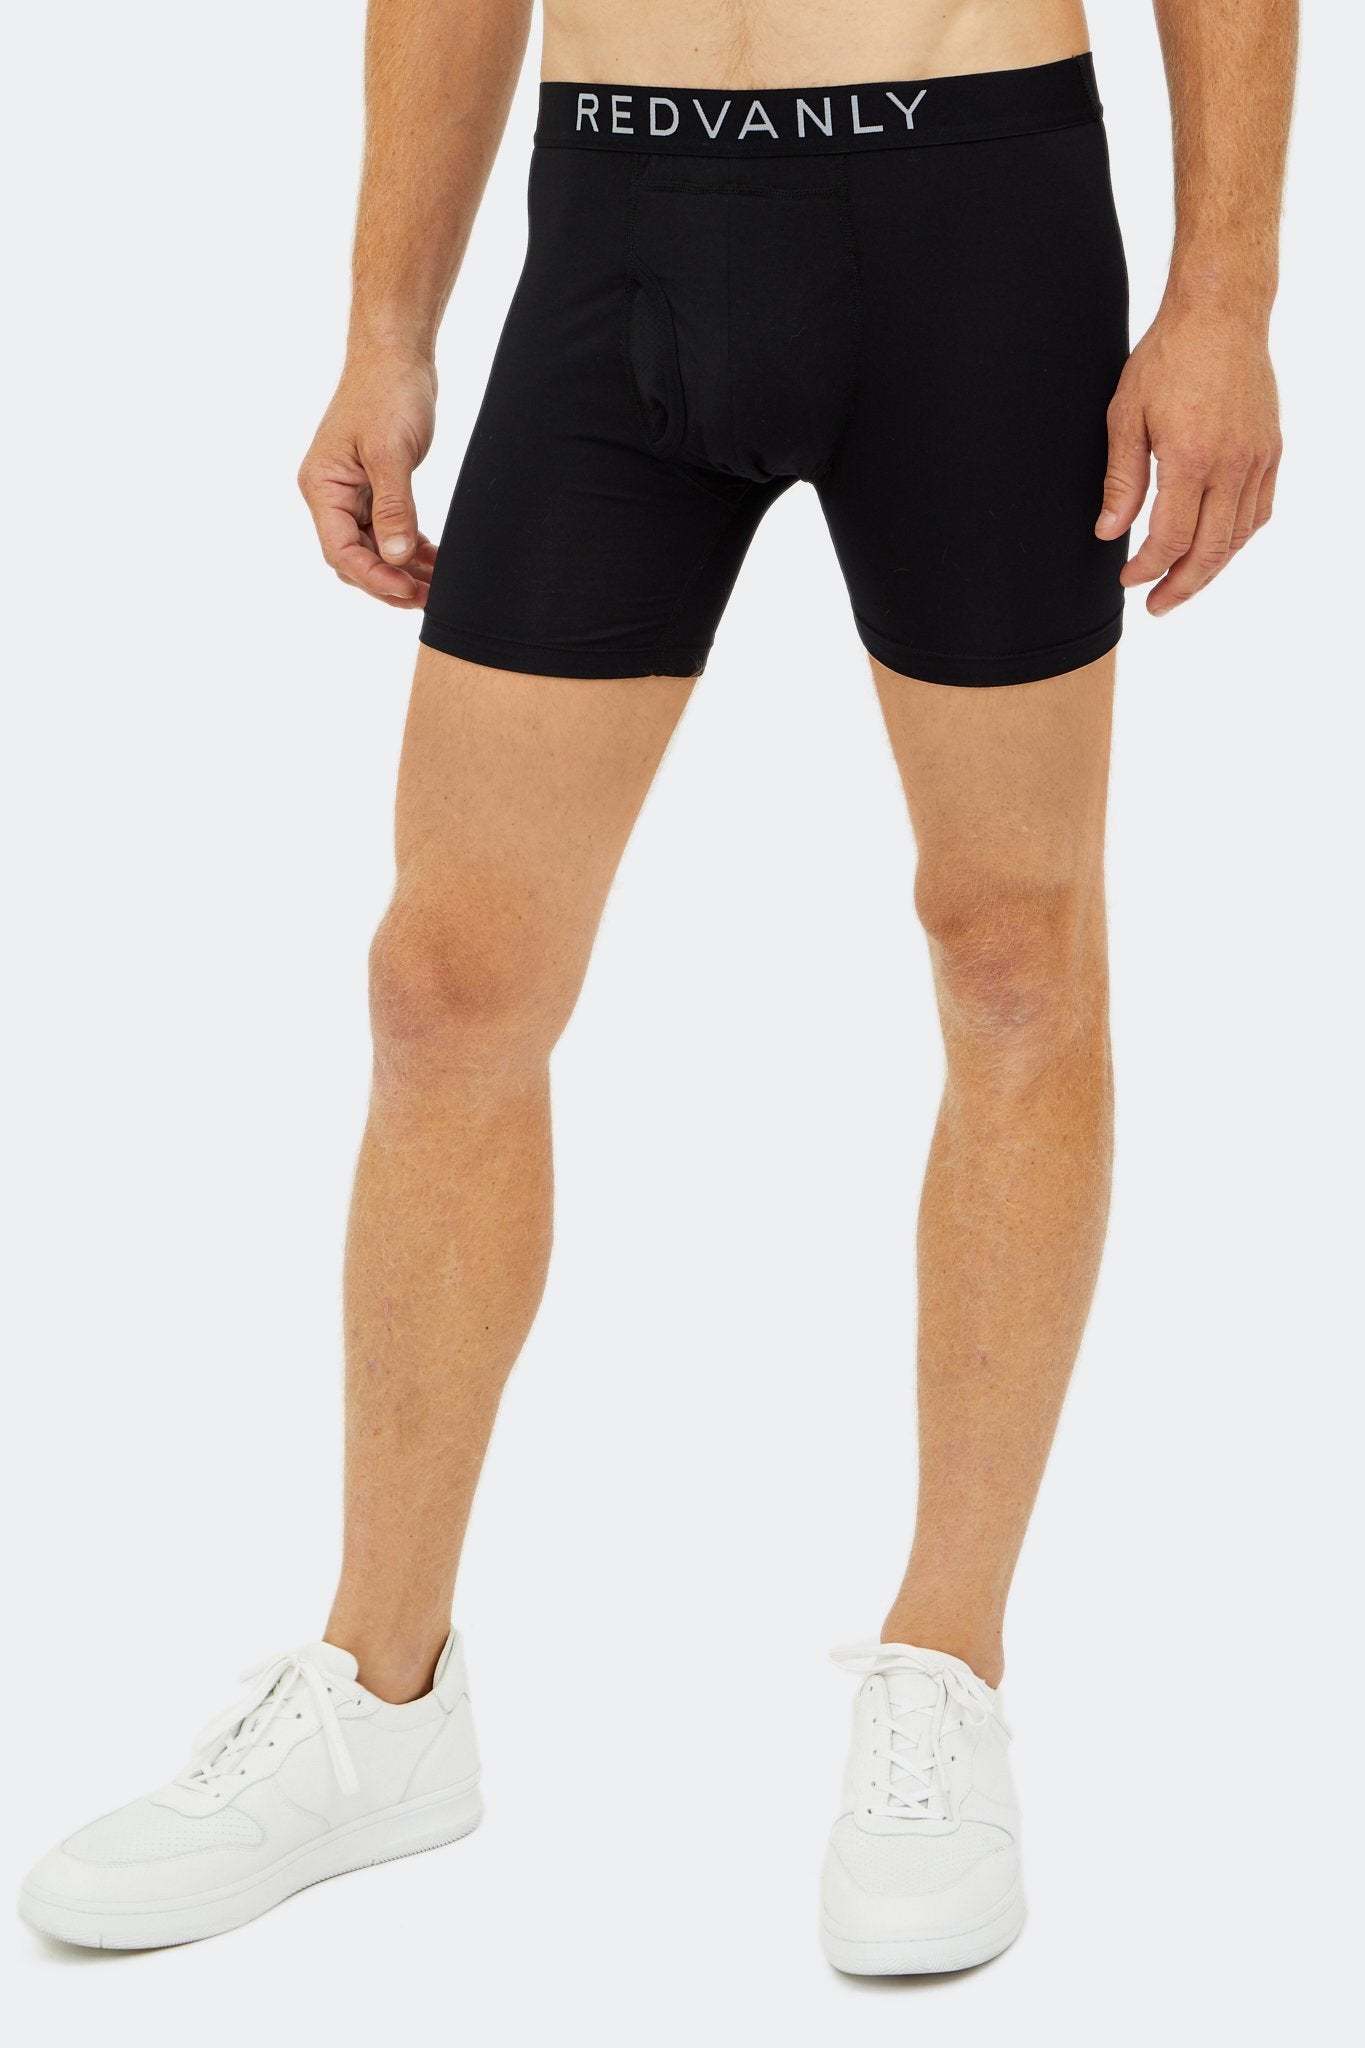 Image of the baxter boxer brief in tuxedo ss23